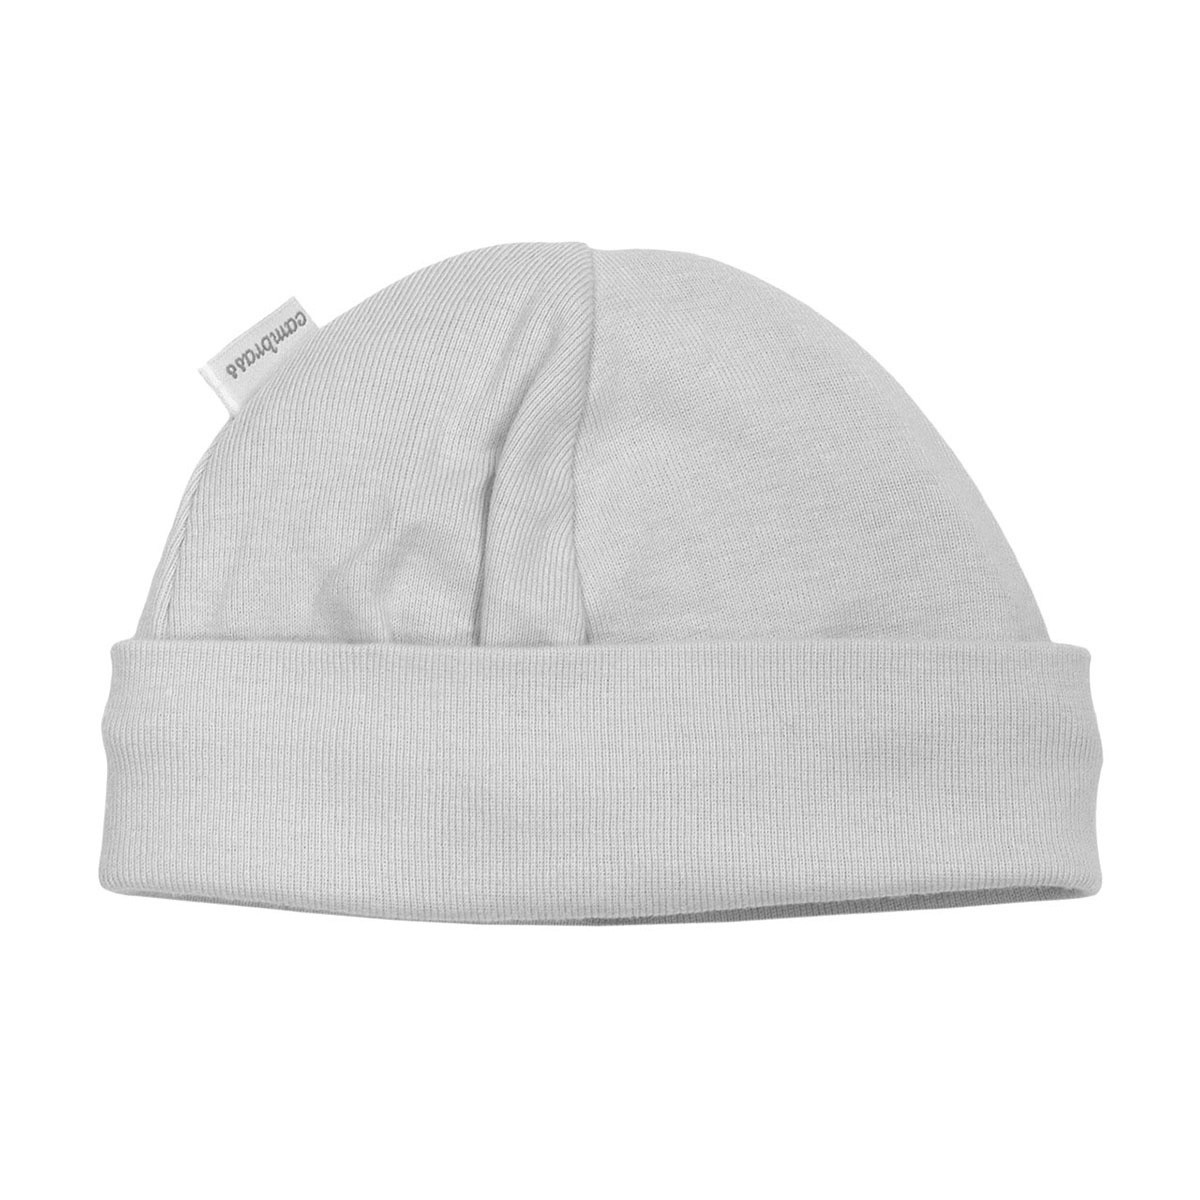 GORRO TRICOT LISO GRIS CAMBRASS - 1